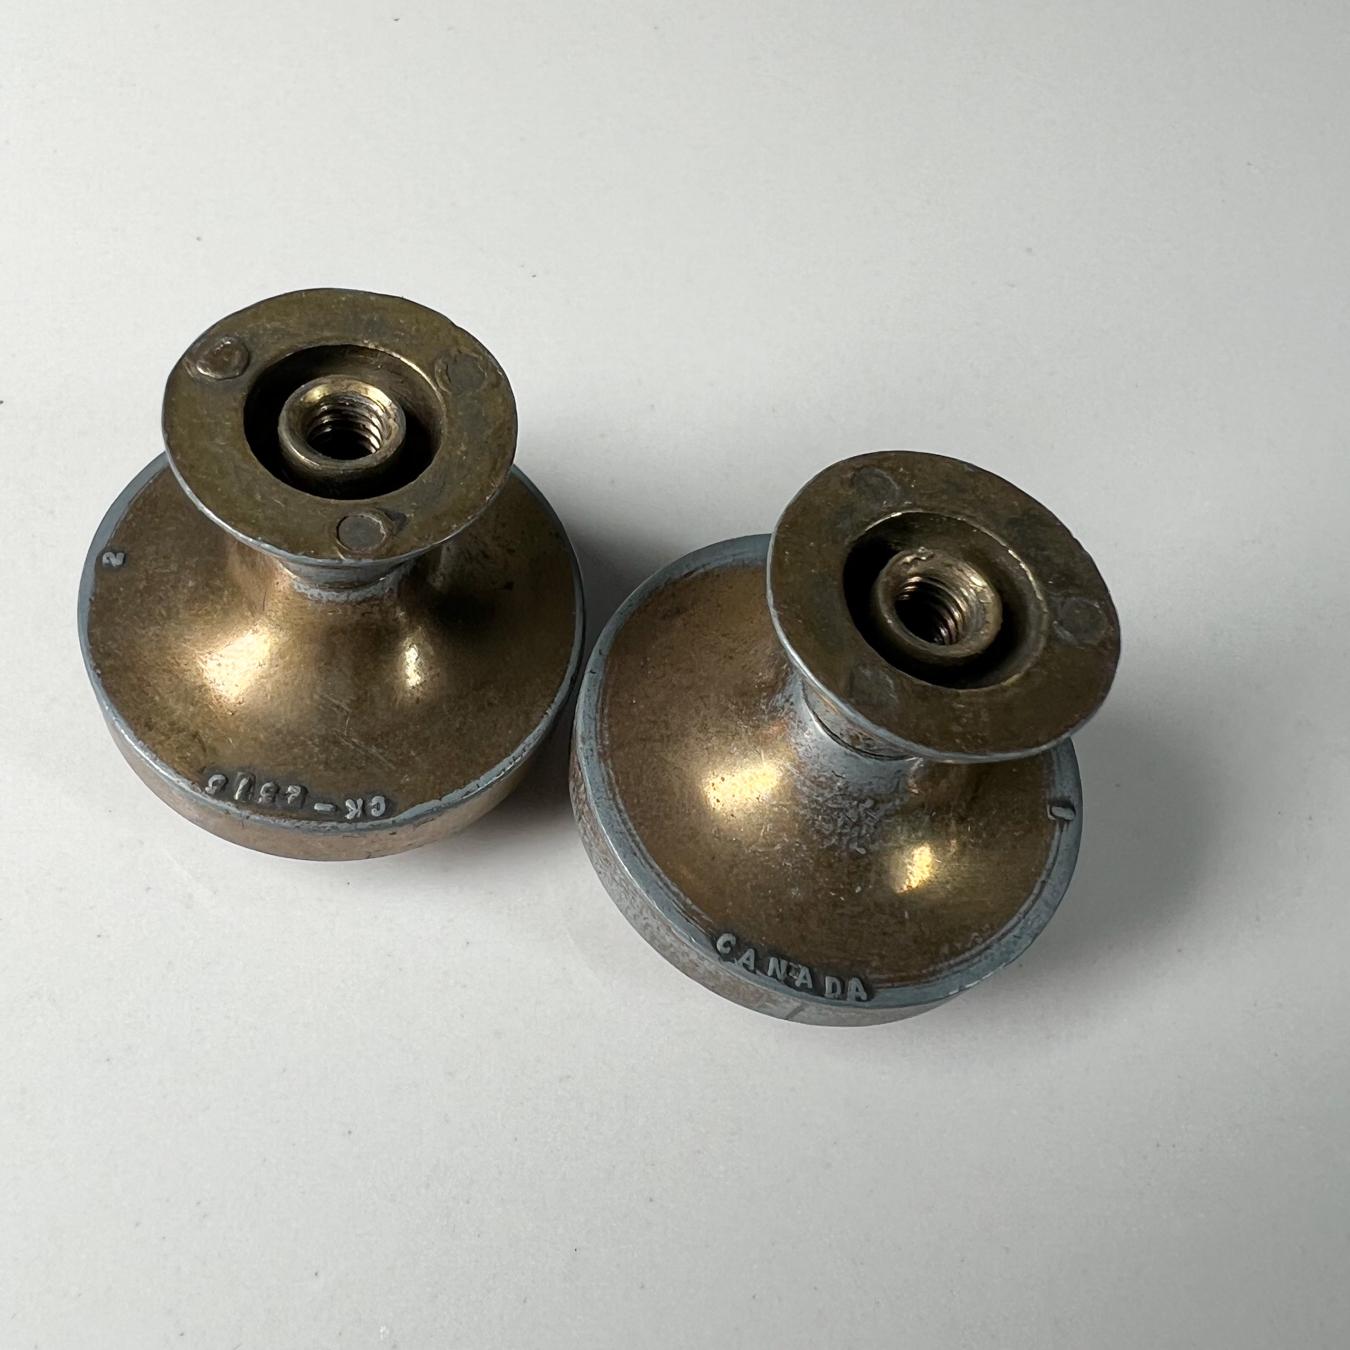 Vintage Hardware drawer pulls brass knobs with wood insert set of 2
Set of 2
stamped Canada
1.13 diameter x 1 tall
Original vintage condition.
See images please.